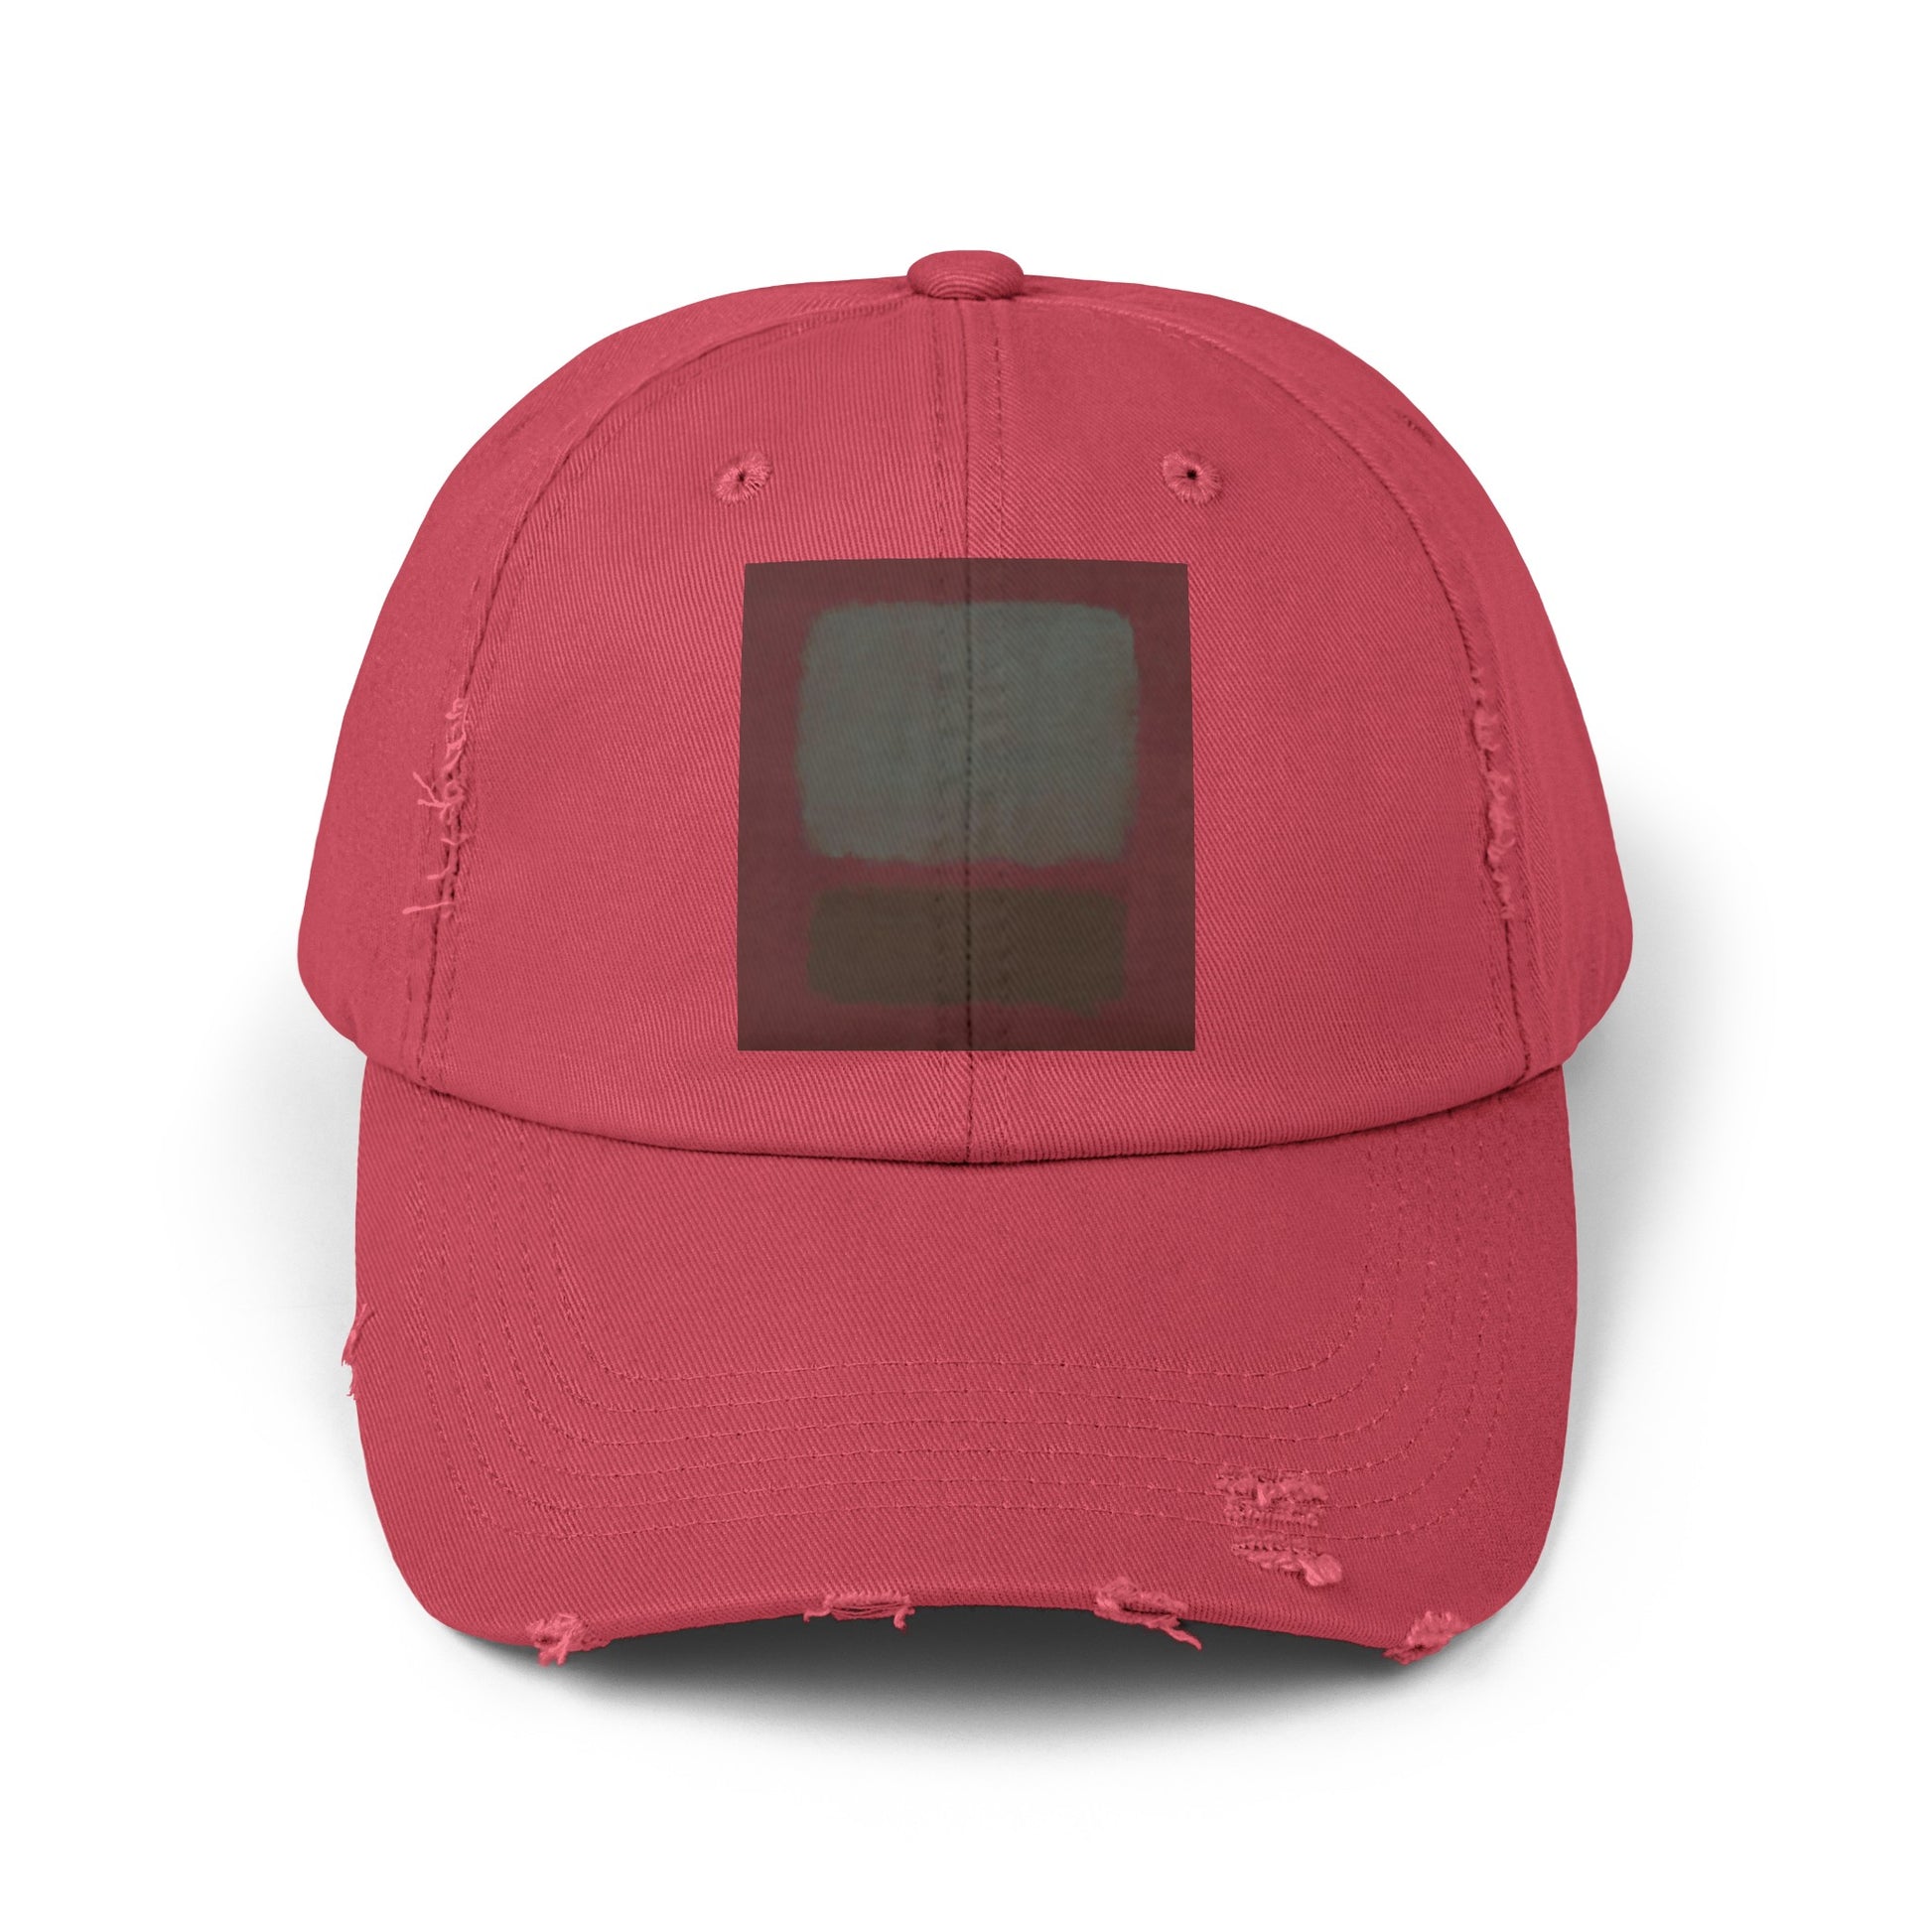 a red hat with a black square on it